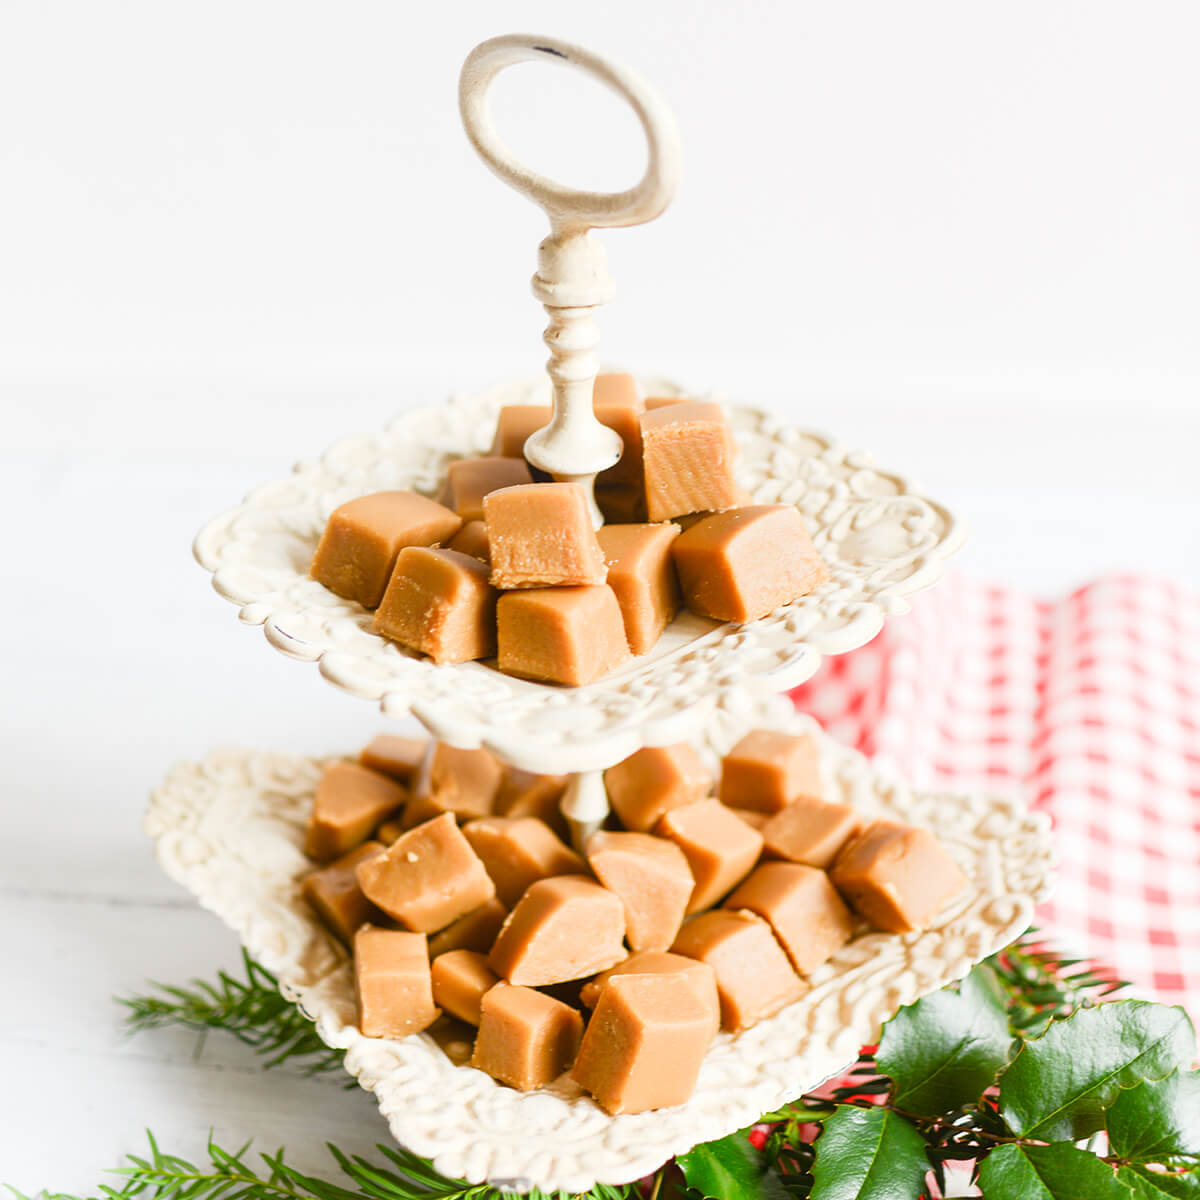 Old fashioned penuche fudge on a two tier, white serving dish.  Fresh holly and evergreen branches and a red and white checked cloth surround the tray.